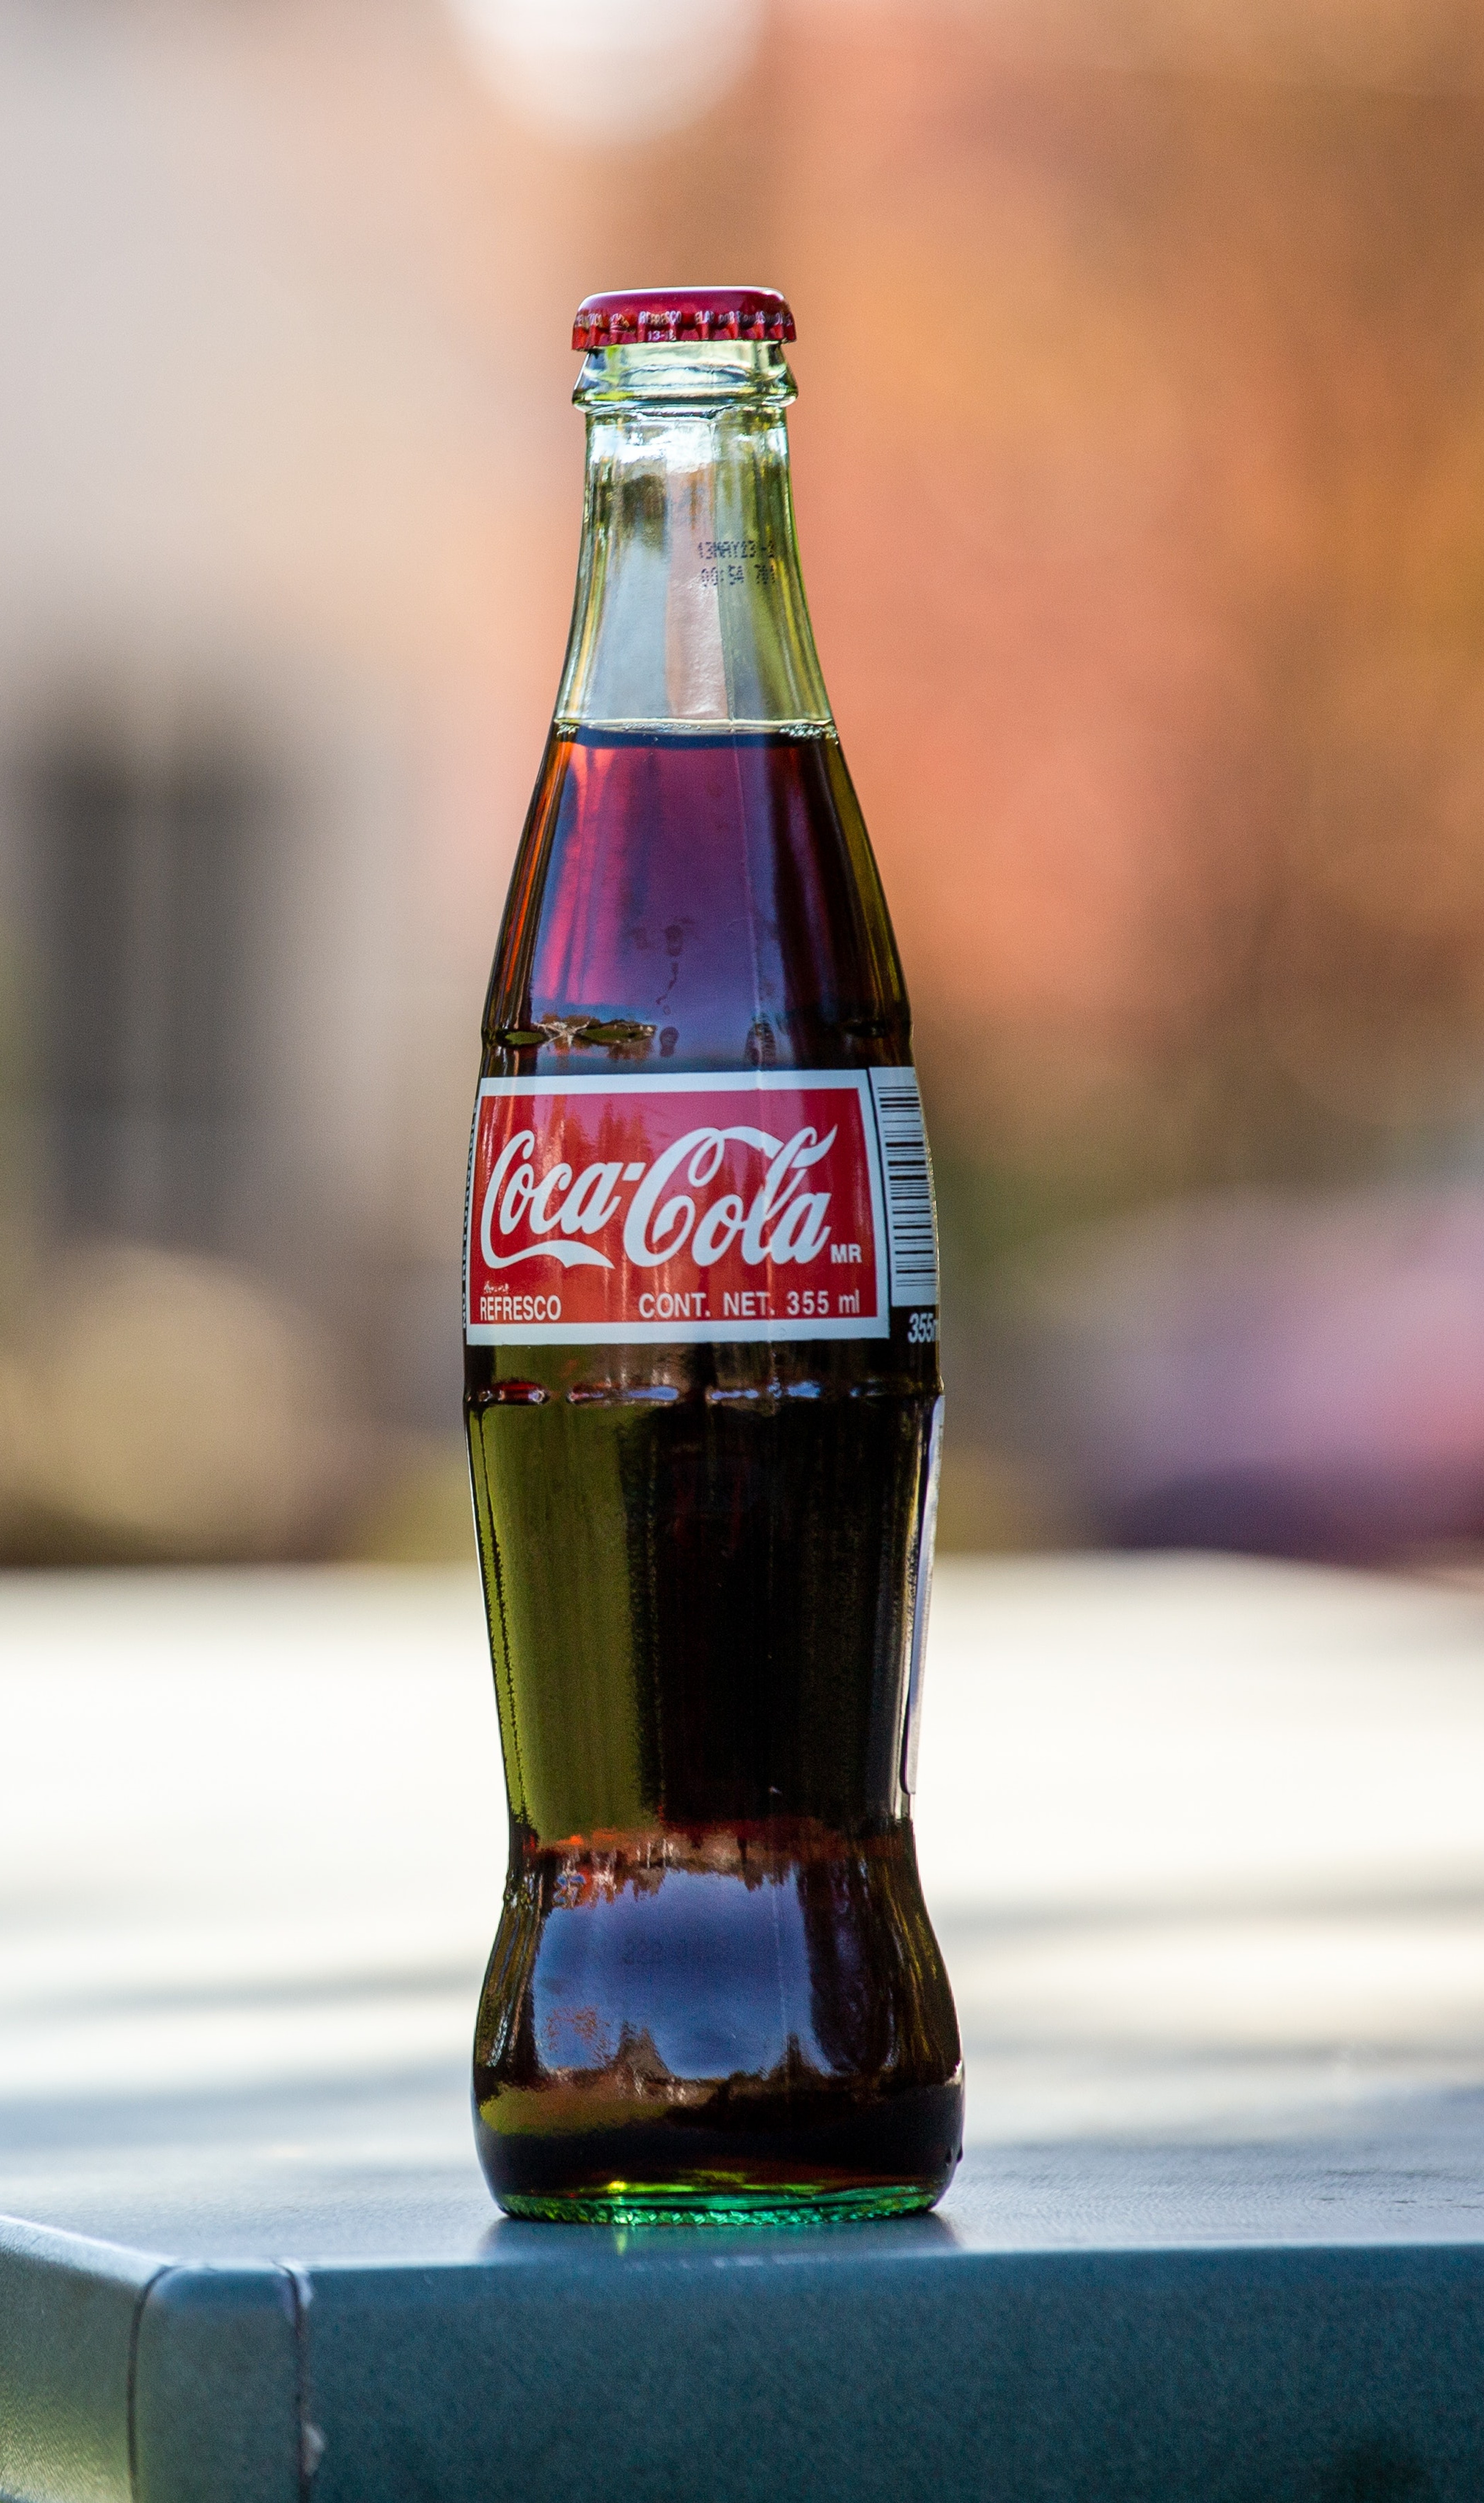 Coca-Cola Bottle on a table